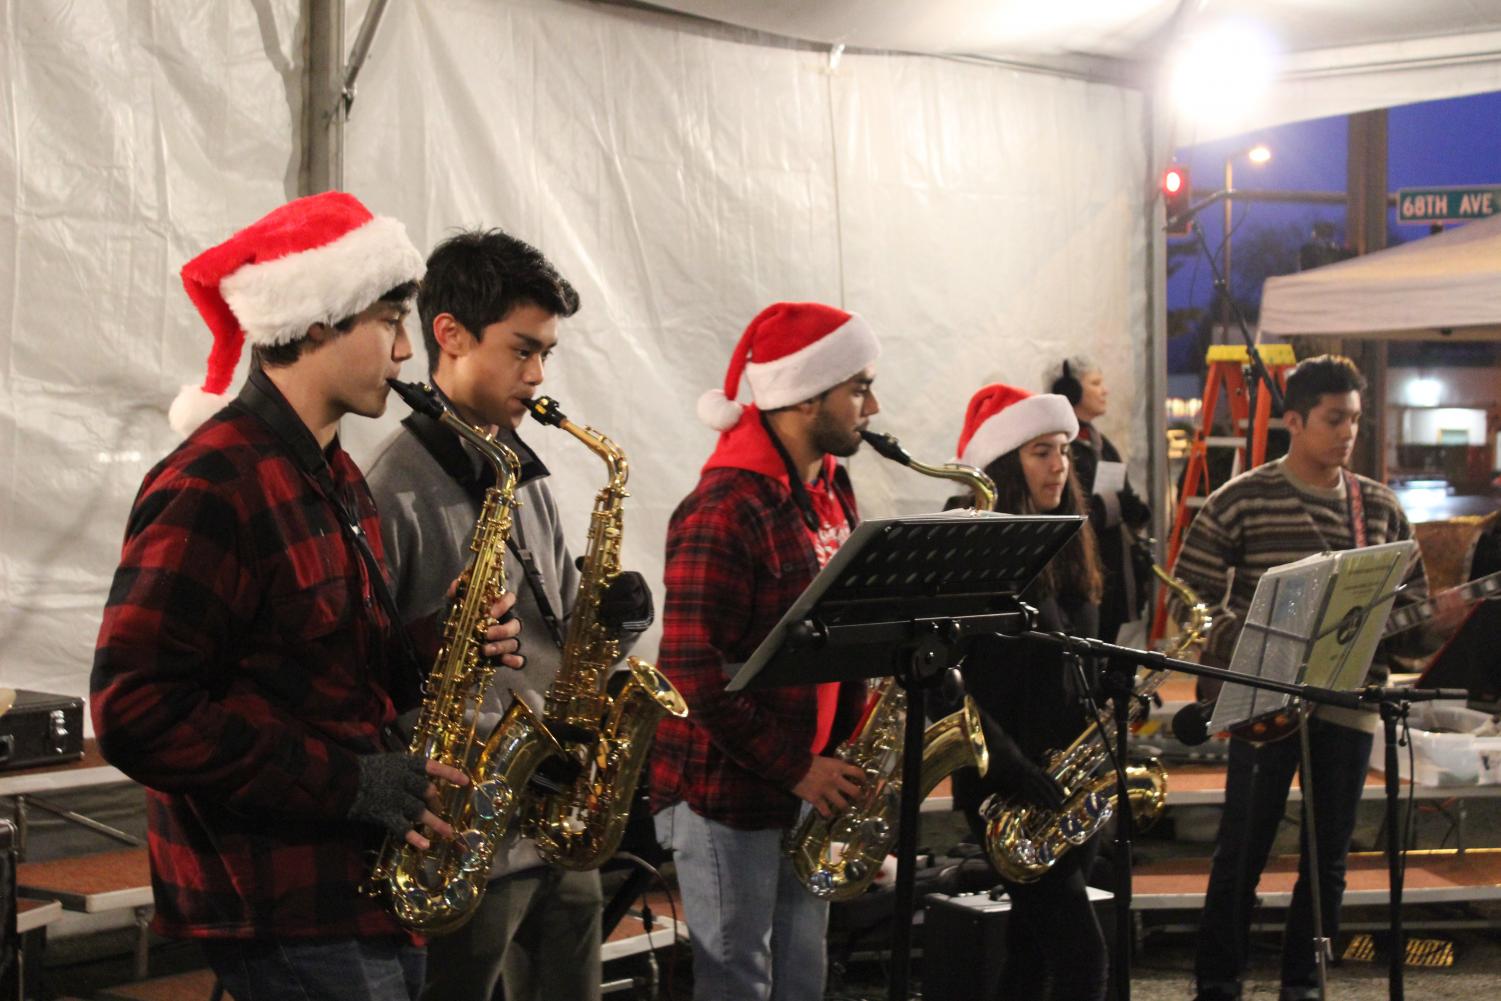 Students+play+Deck+the+Halls+at+the+Kenmore+Christmas+Tree+Lighting+no+Dec.+2.+Musicians+%28from+left+to+right%29%3A+Ethan+Pickering%2C+Eric+Ni%2C+Naz+Astudillo+and+Melia+Baquian+on+the+saxophone+and+Beto+Palma+on+the+guitar.+Though+the+weather+was+rainy%2C+the+musicians+played+music+throughout+the+event%2C+raising+money+for+the+American+Cancer+Society.